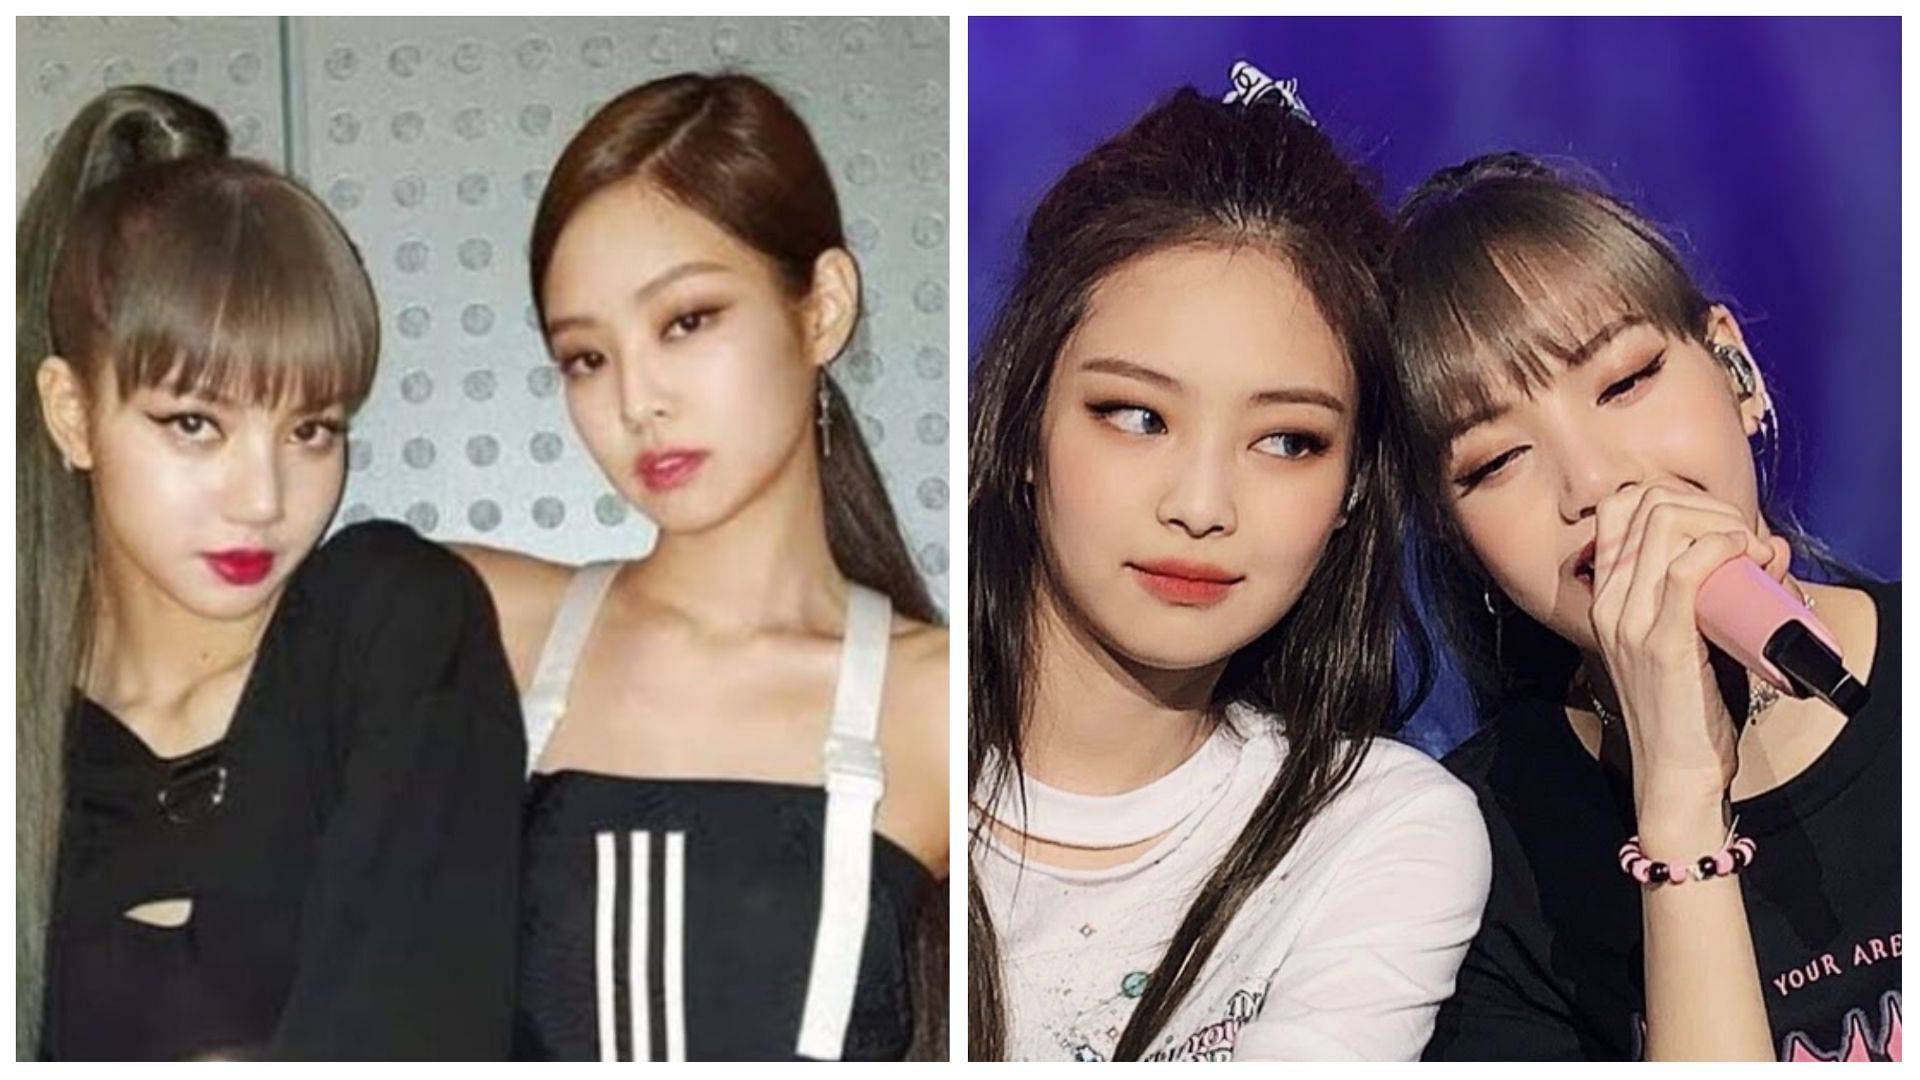 All's Not Well Between BLACKPINK's Lisa & Jennie? Netizens Sense Bad Blood  As The 'Money' Singer Didn't Promote Her Bandmate's 'You & Me' Release -  Find Out The Truth!